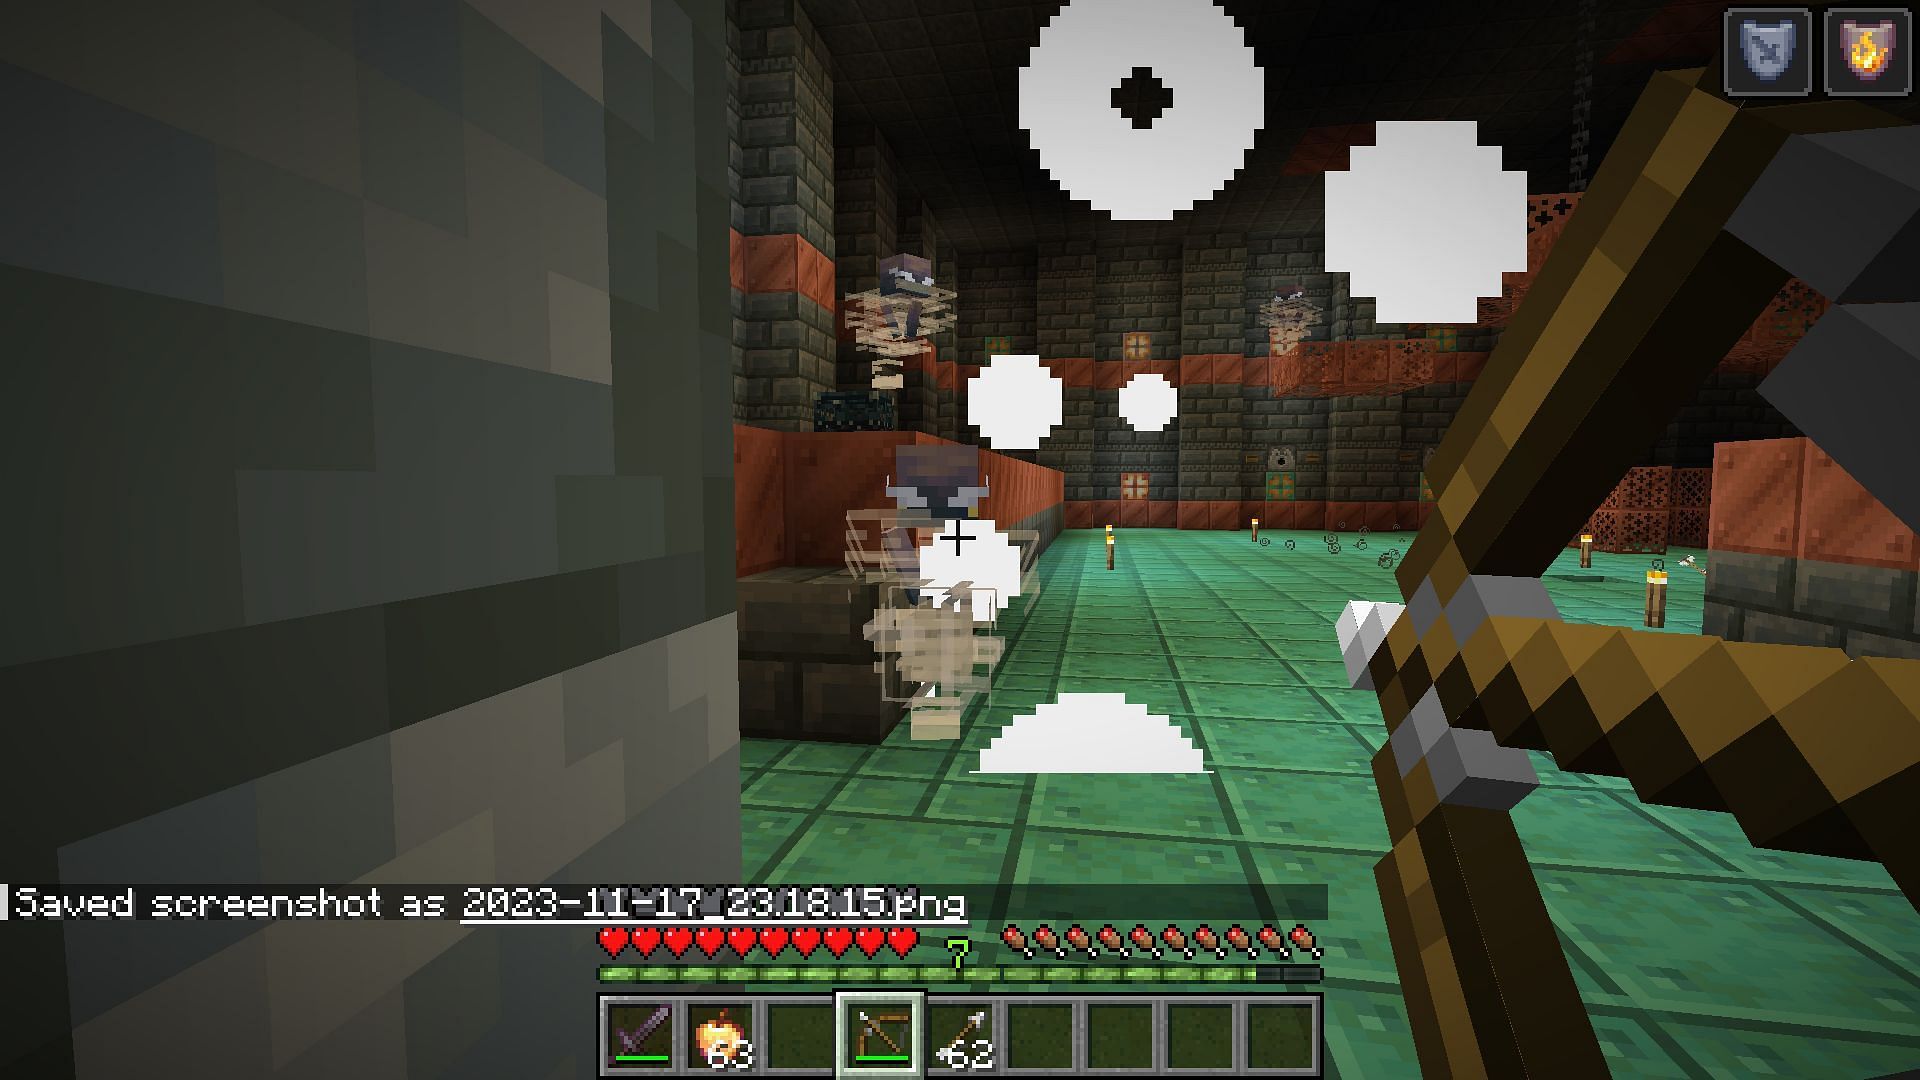 Trial chamber is a brand new structure filled with hostile mobs to fight (Image via Mojang Studios)